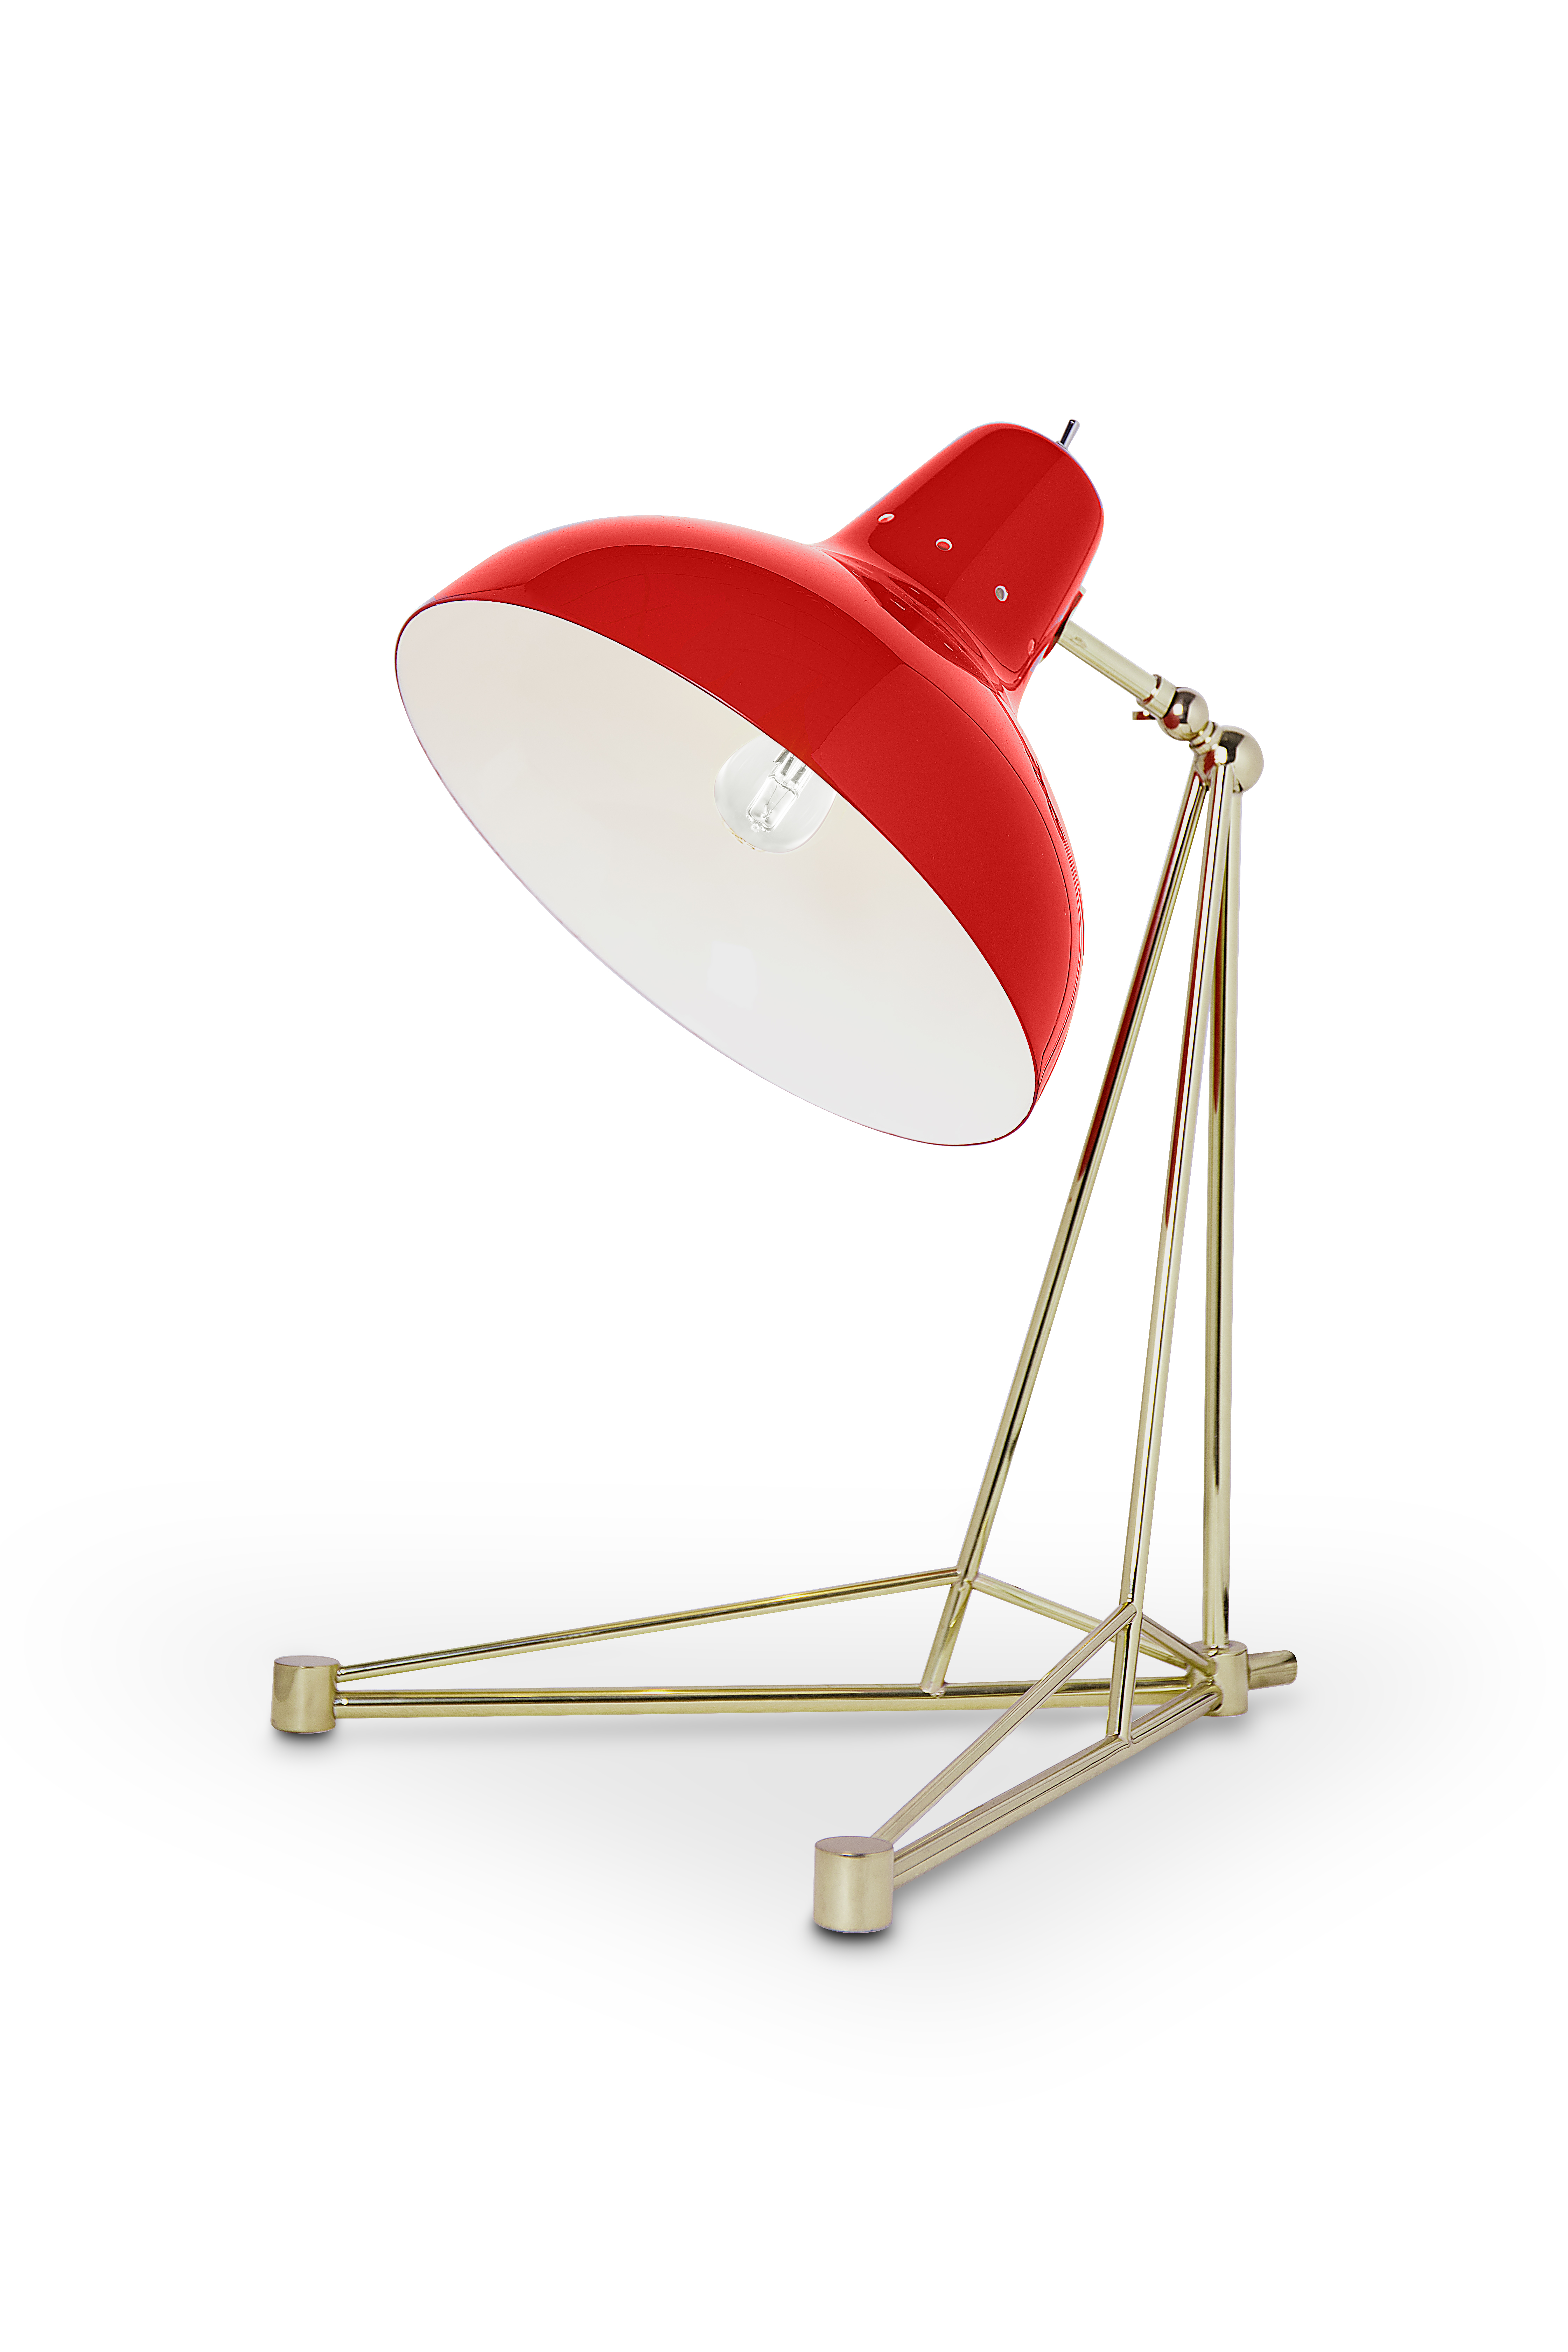 Contemporary Lighting Ideas: The Perfect Industrial Table Lamp